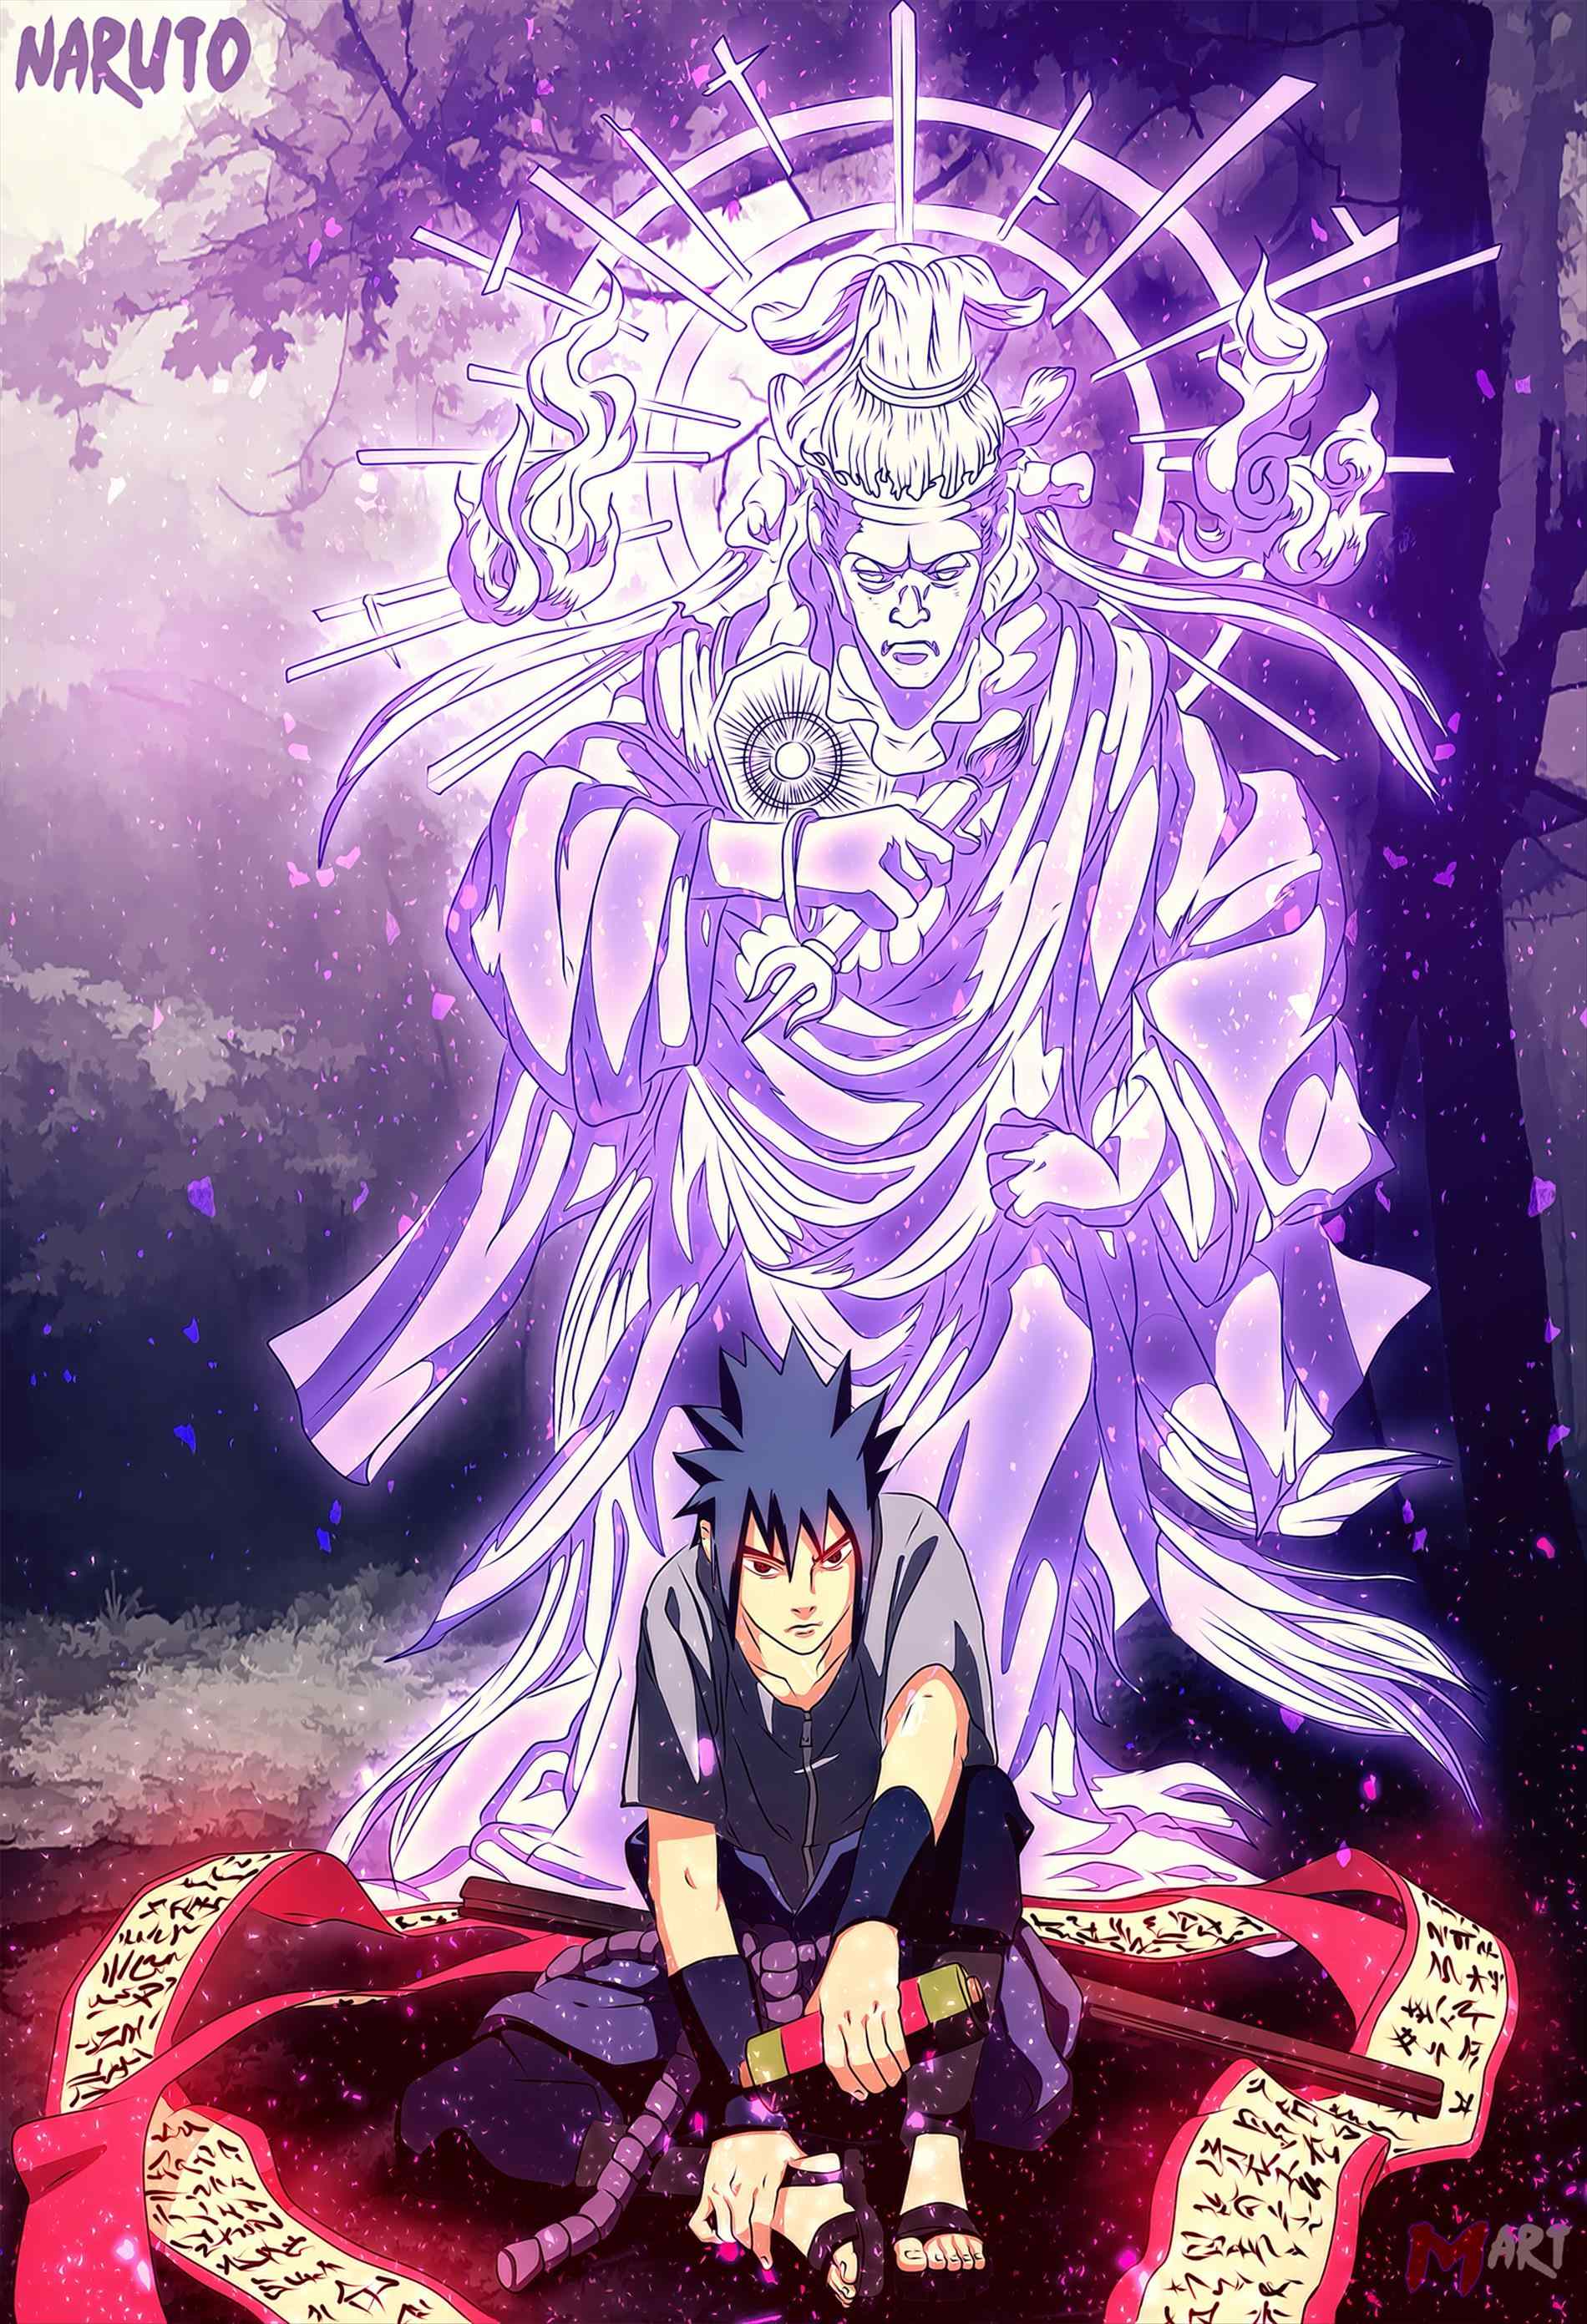 Download Susanoo Naruto wallpapers for mobile phone free Susanoo  Naruto HD pictures